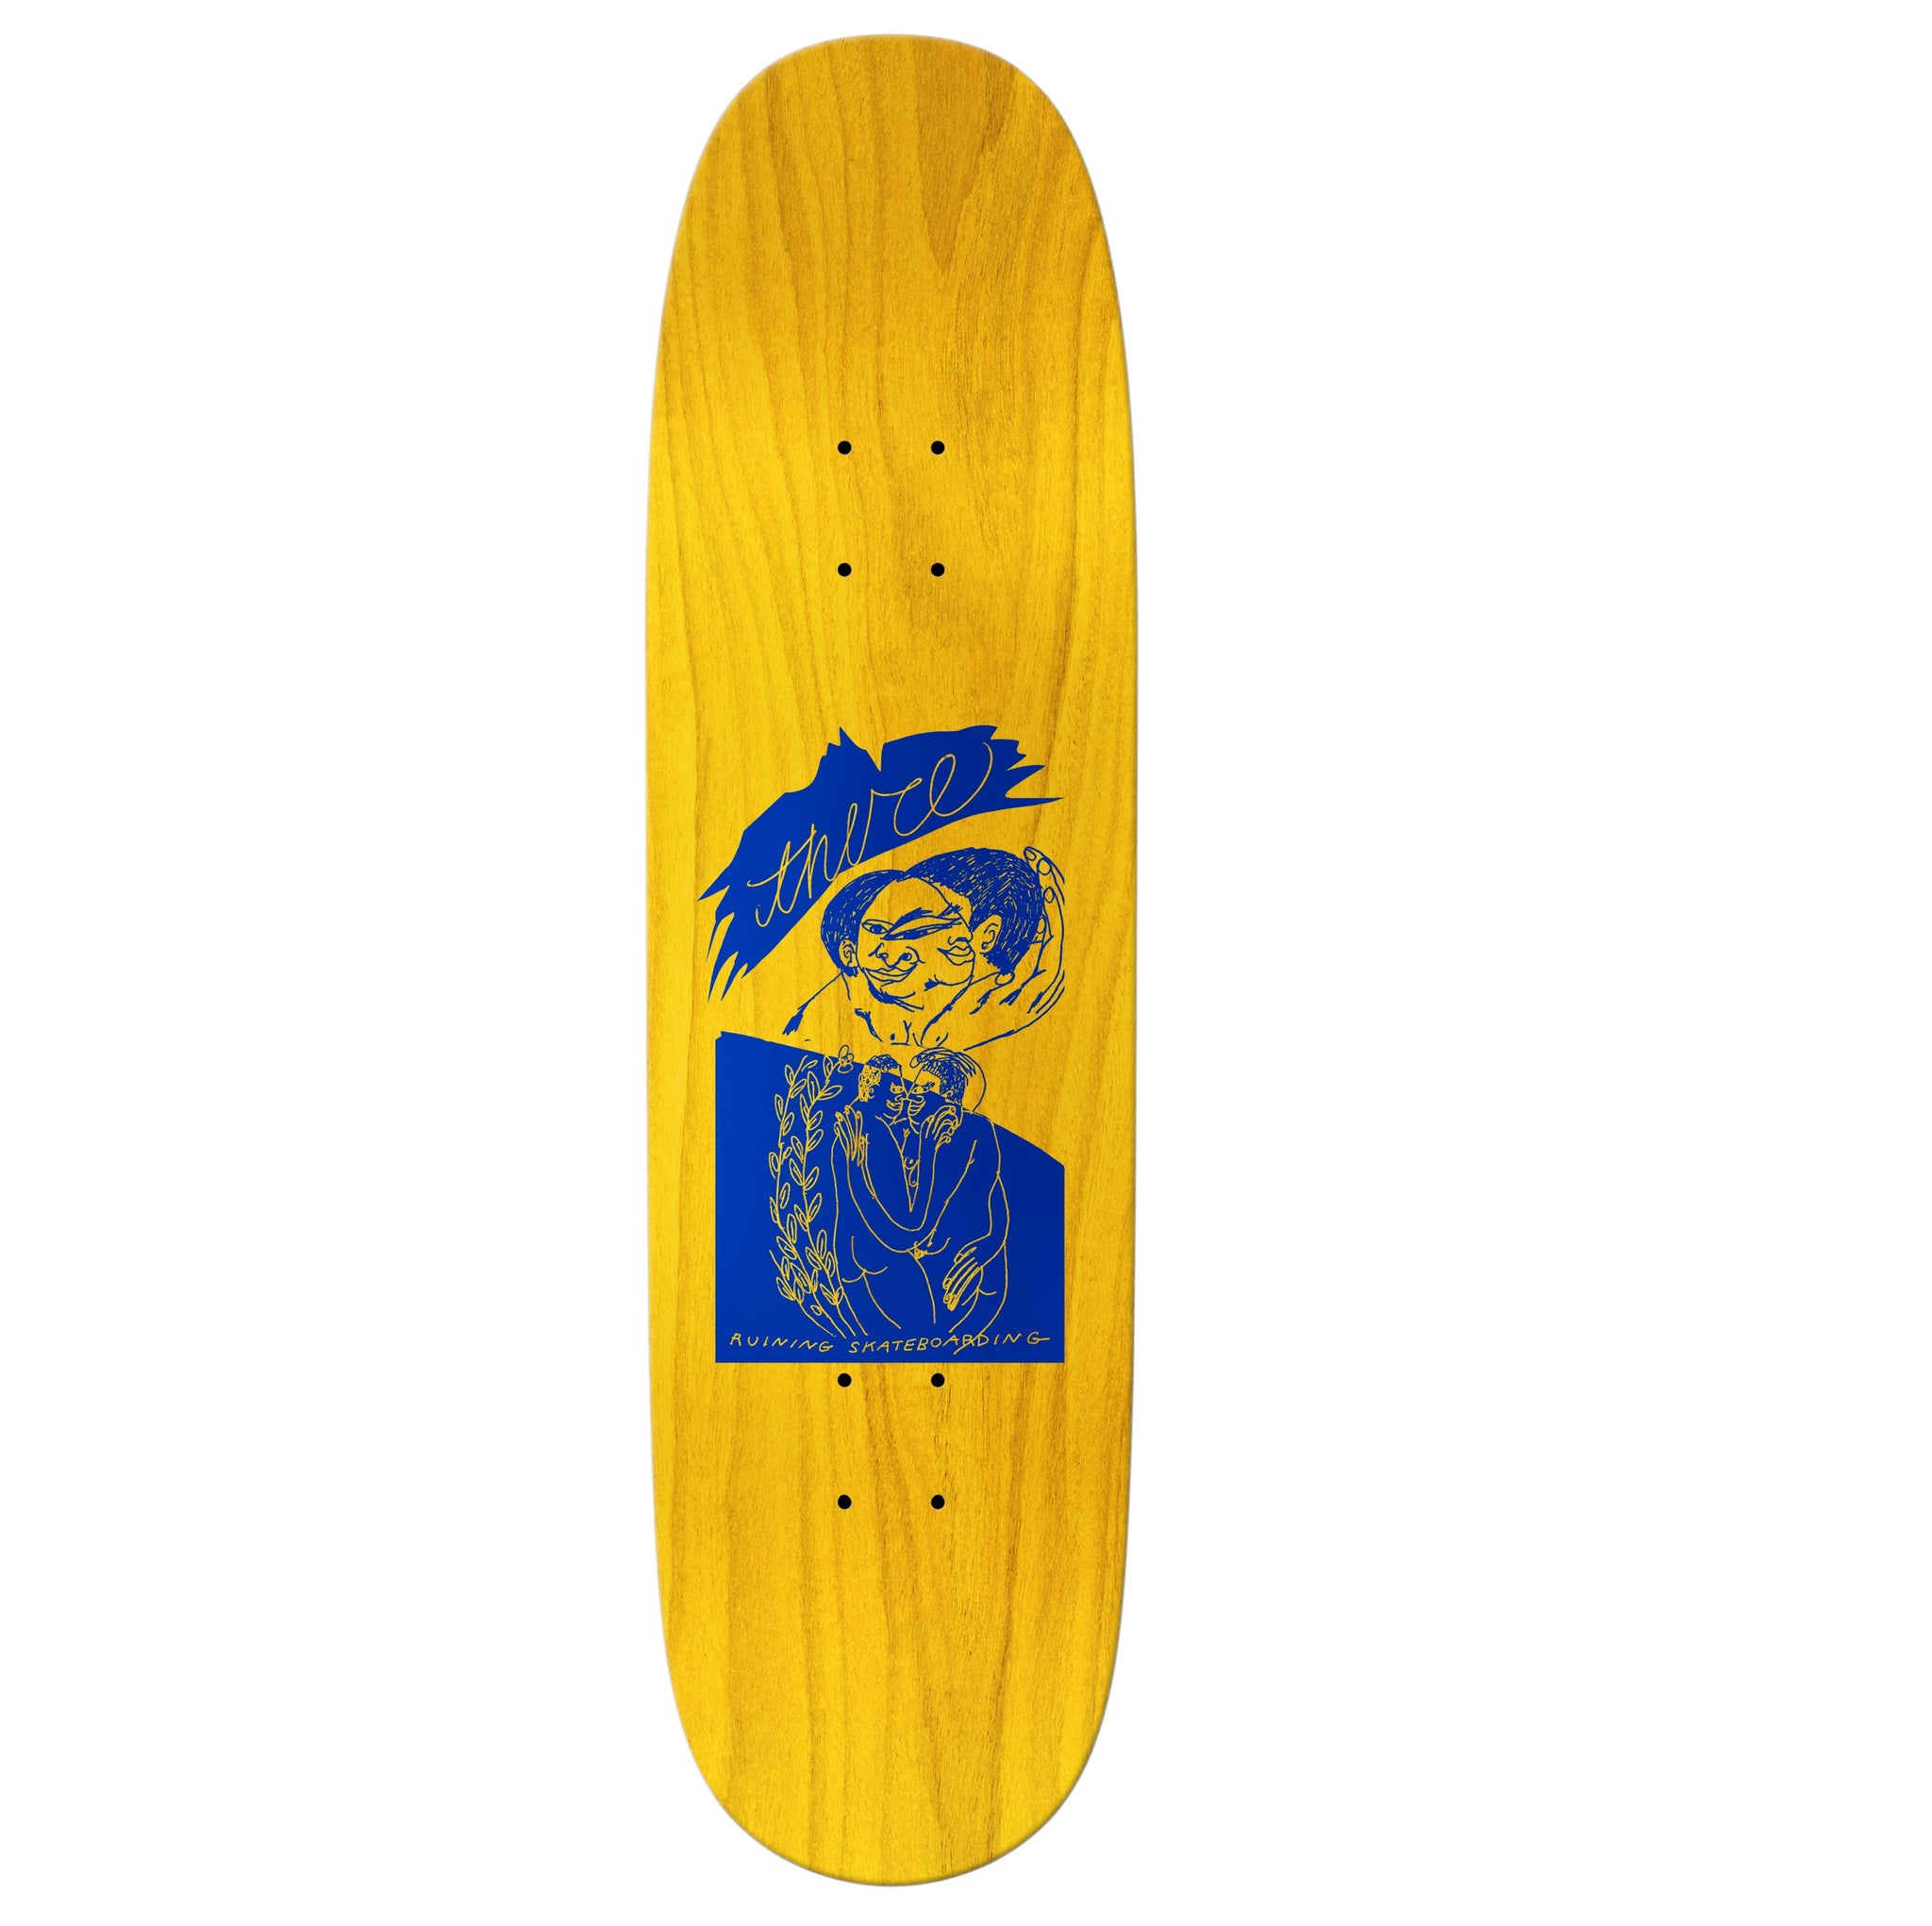 There Skateboards "Marbie Miller- Dancing by myself" 8.5" Deck